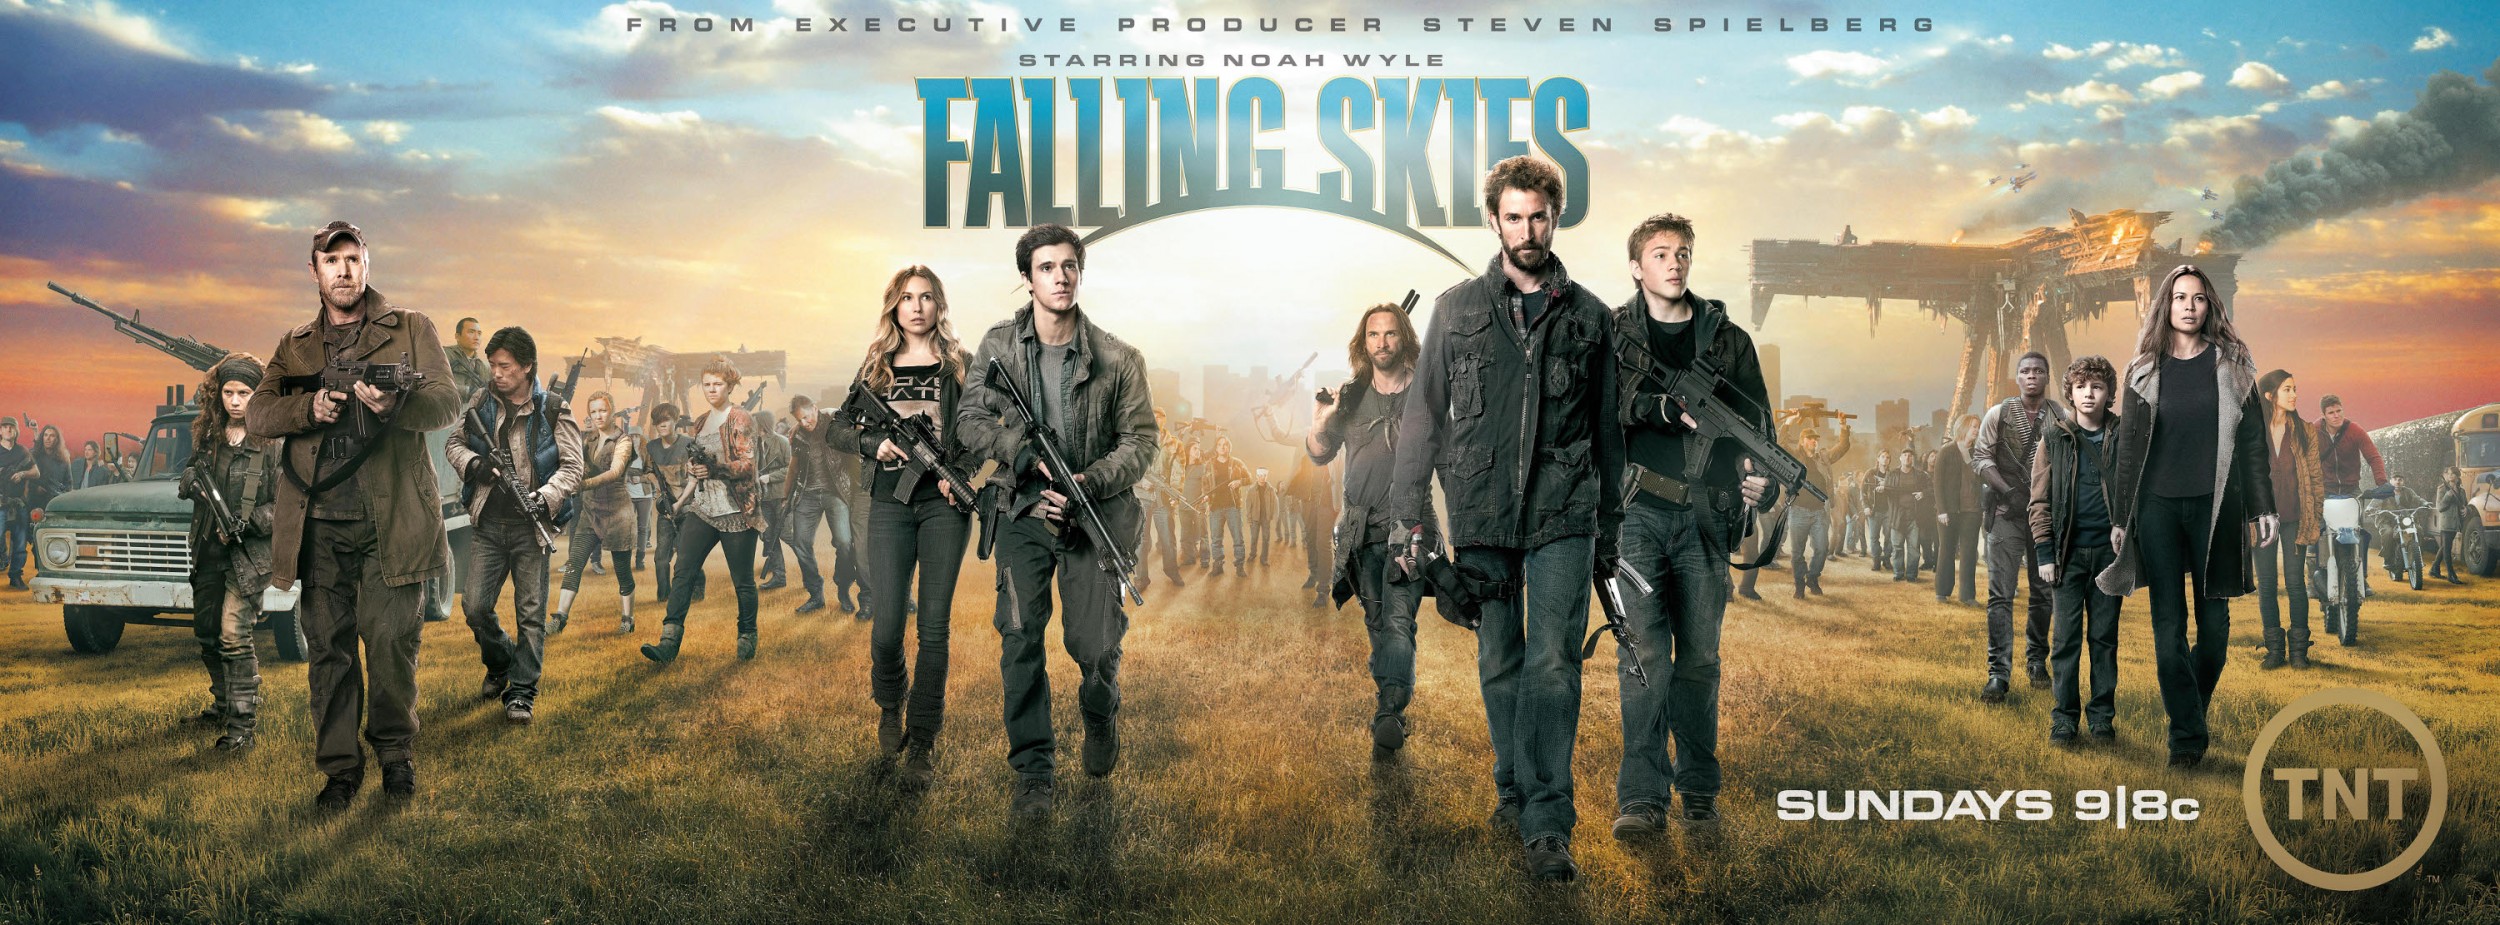 Mega Sized TV Poster Image for Falling Skies (#7 of 24)